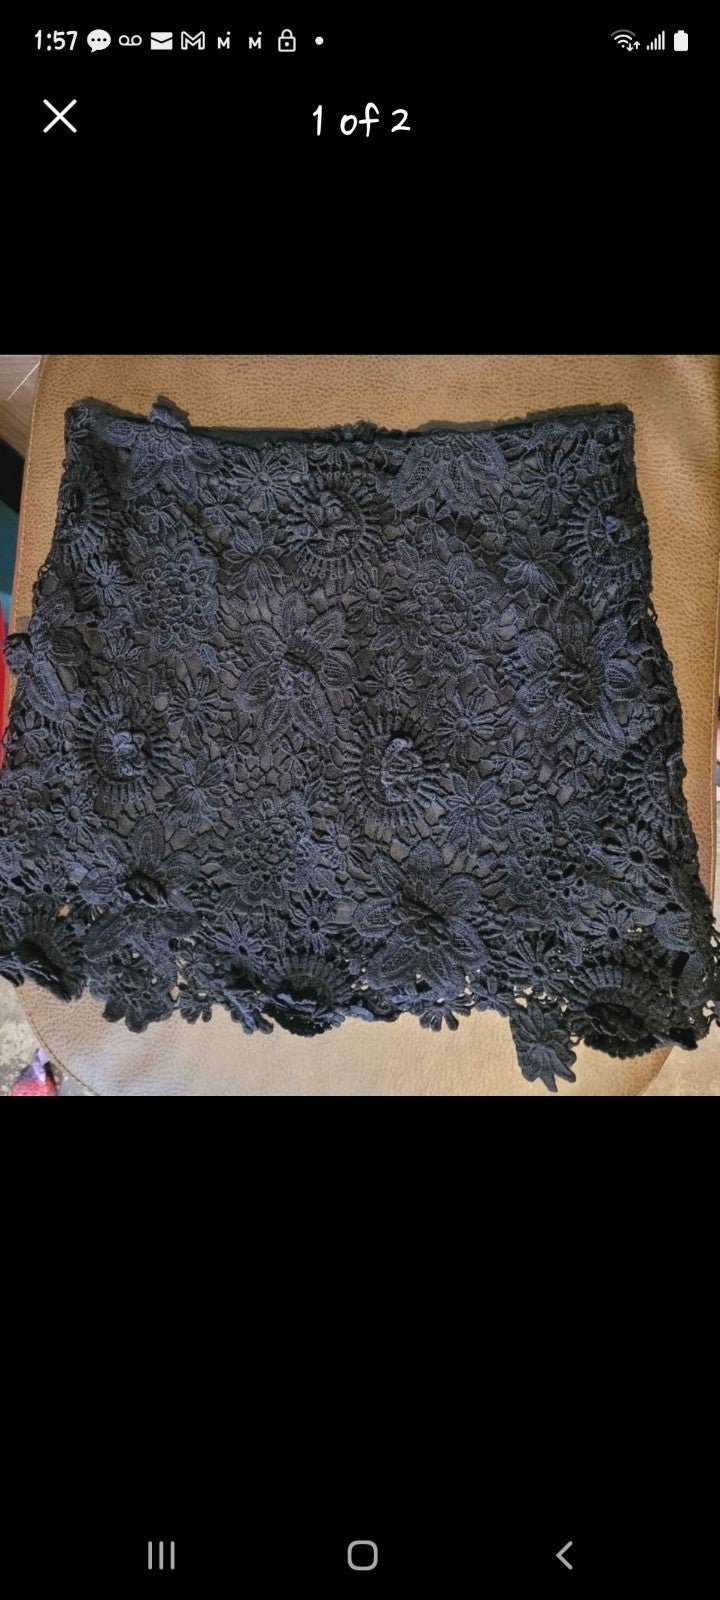 Discounted Lace skirt notEGFrDg for sale